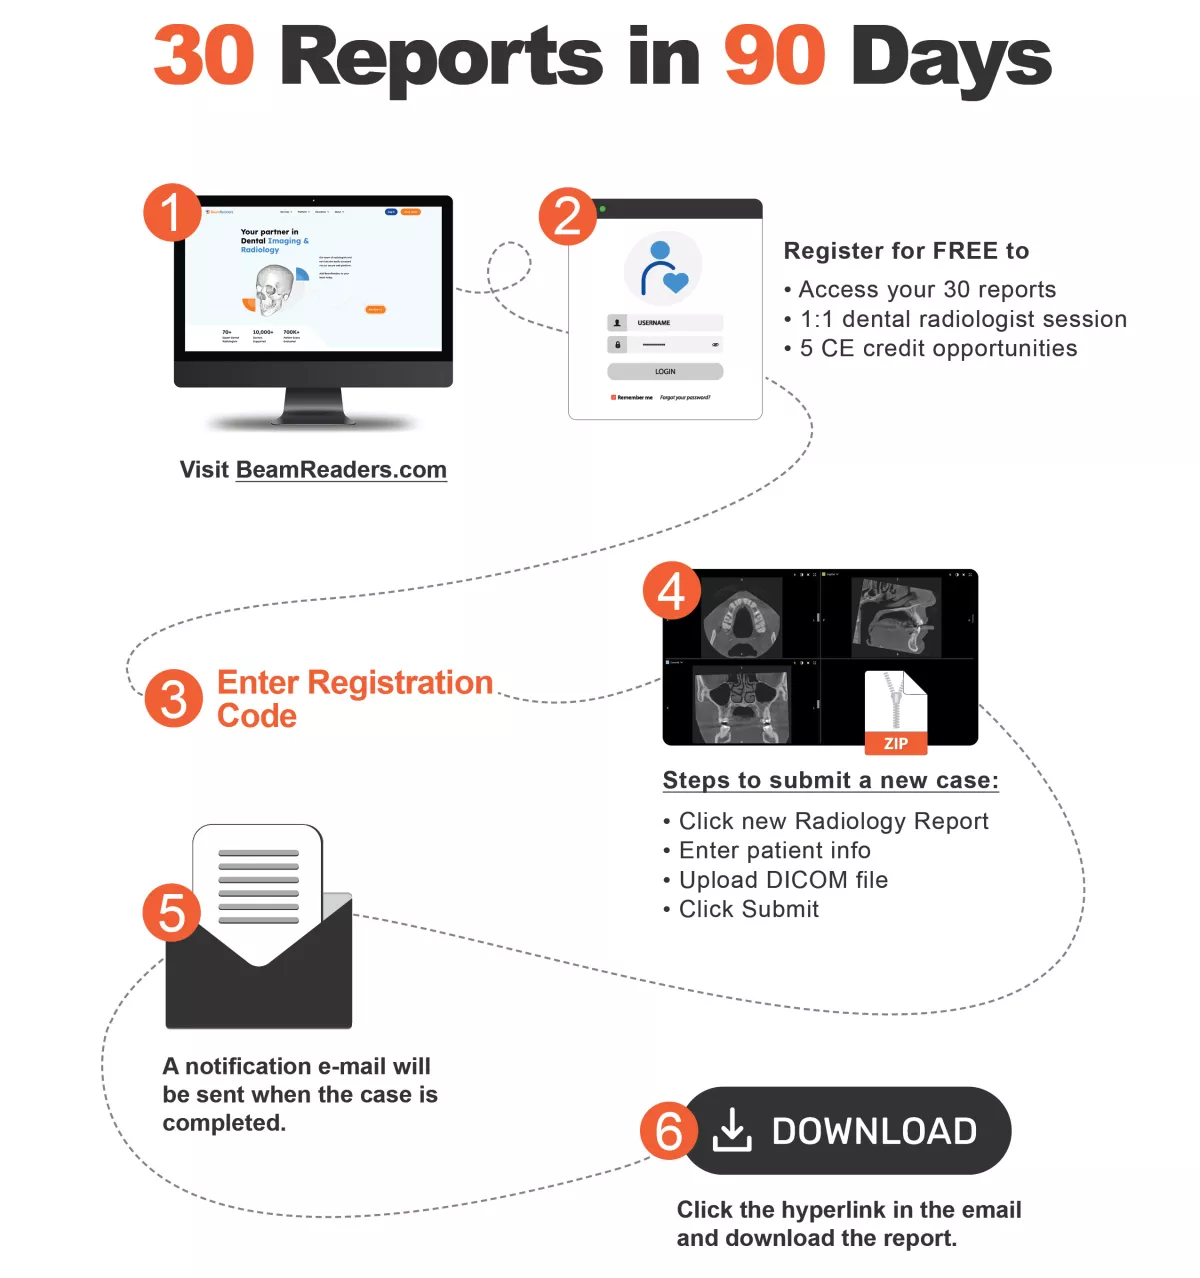 6 steps process for 30 reports in 90 days